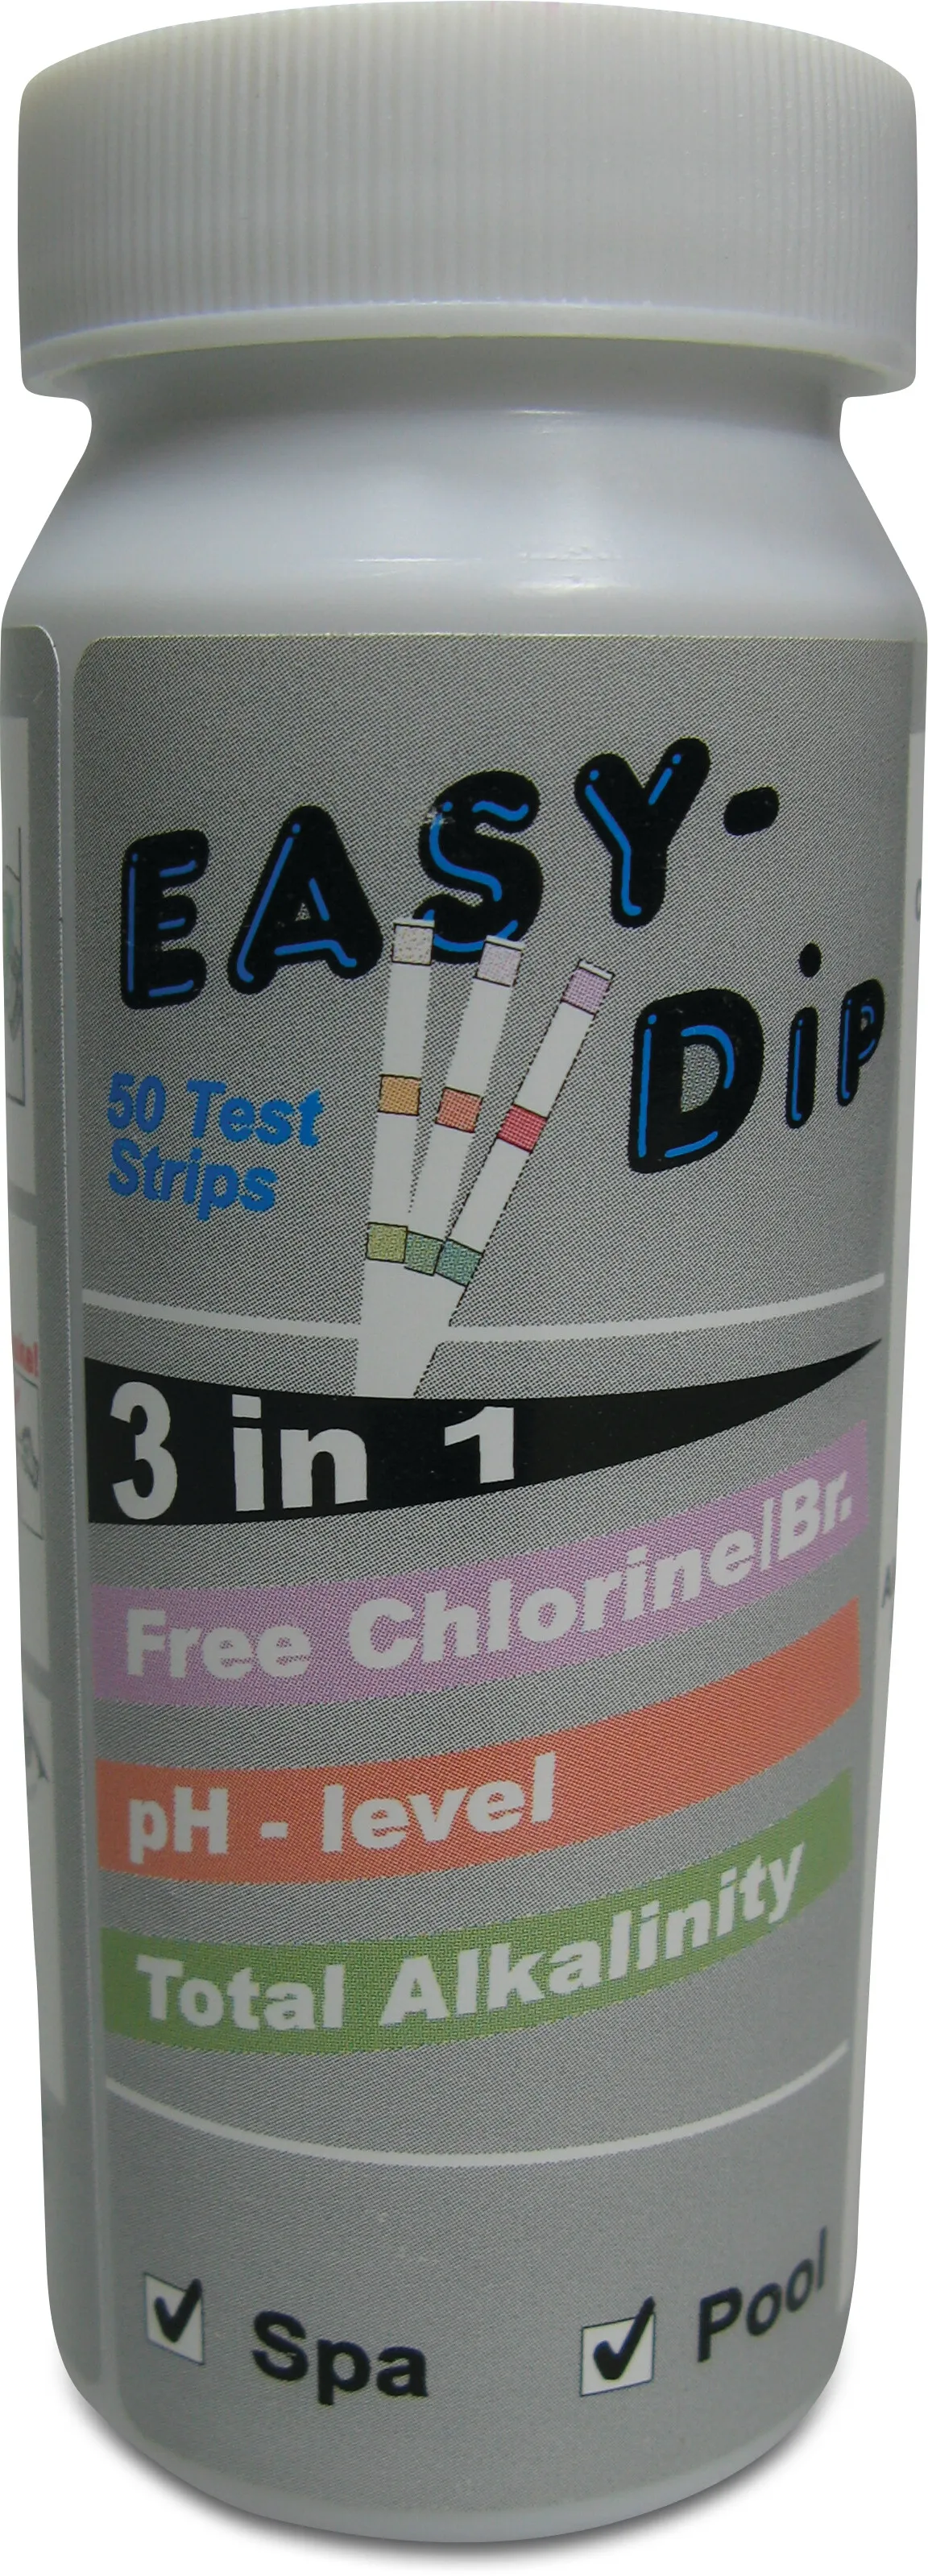 Pool-I.D. 5-in-1 test strips for the measurement of pH, free Chlorine, Bromine Alkalinity, Total Hardness and Cyanic Acid values 50 pcs